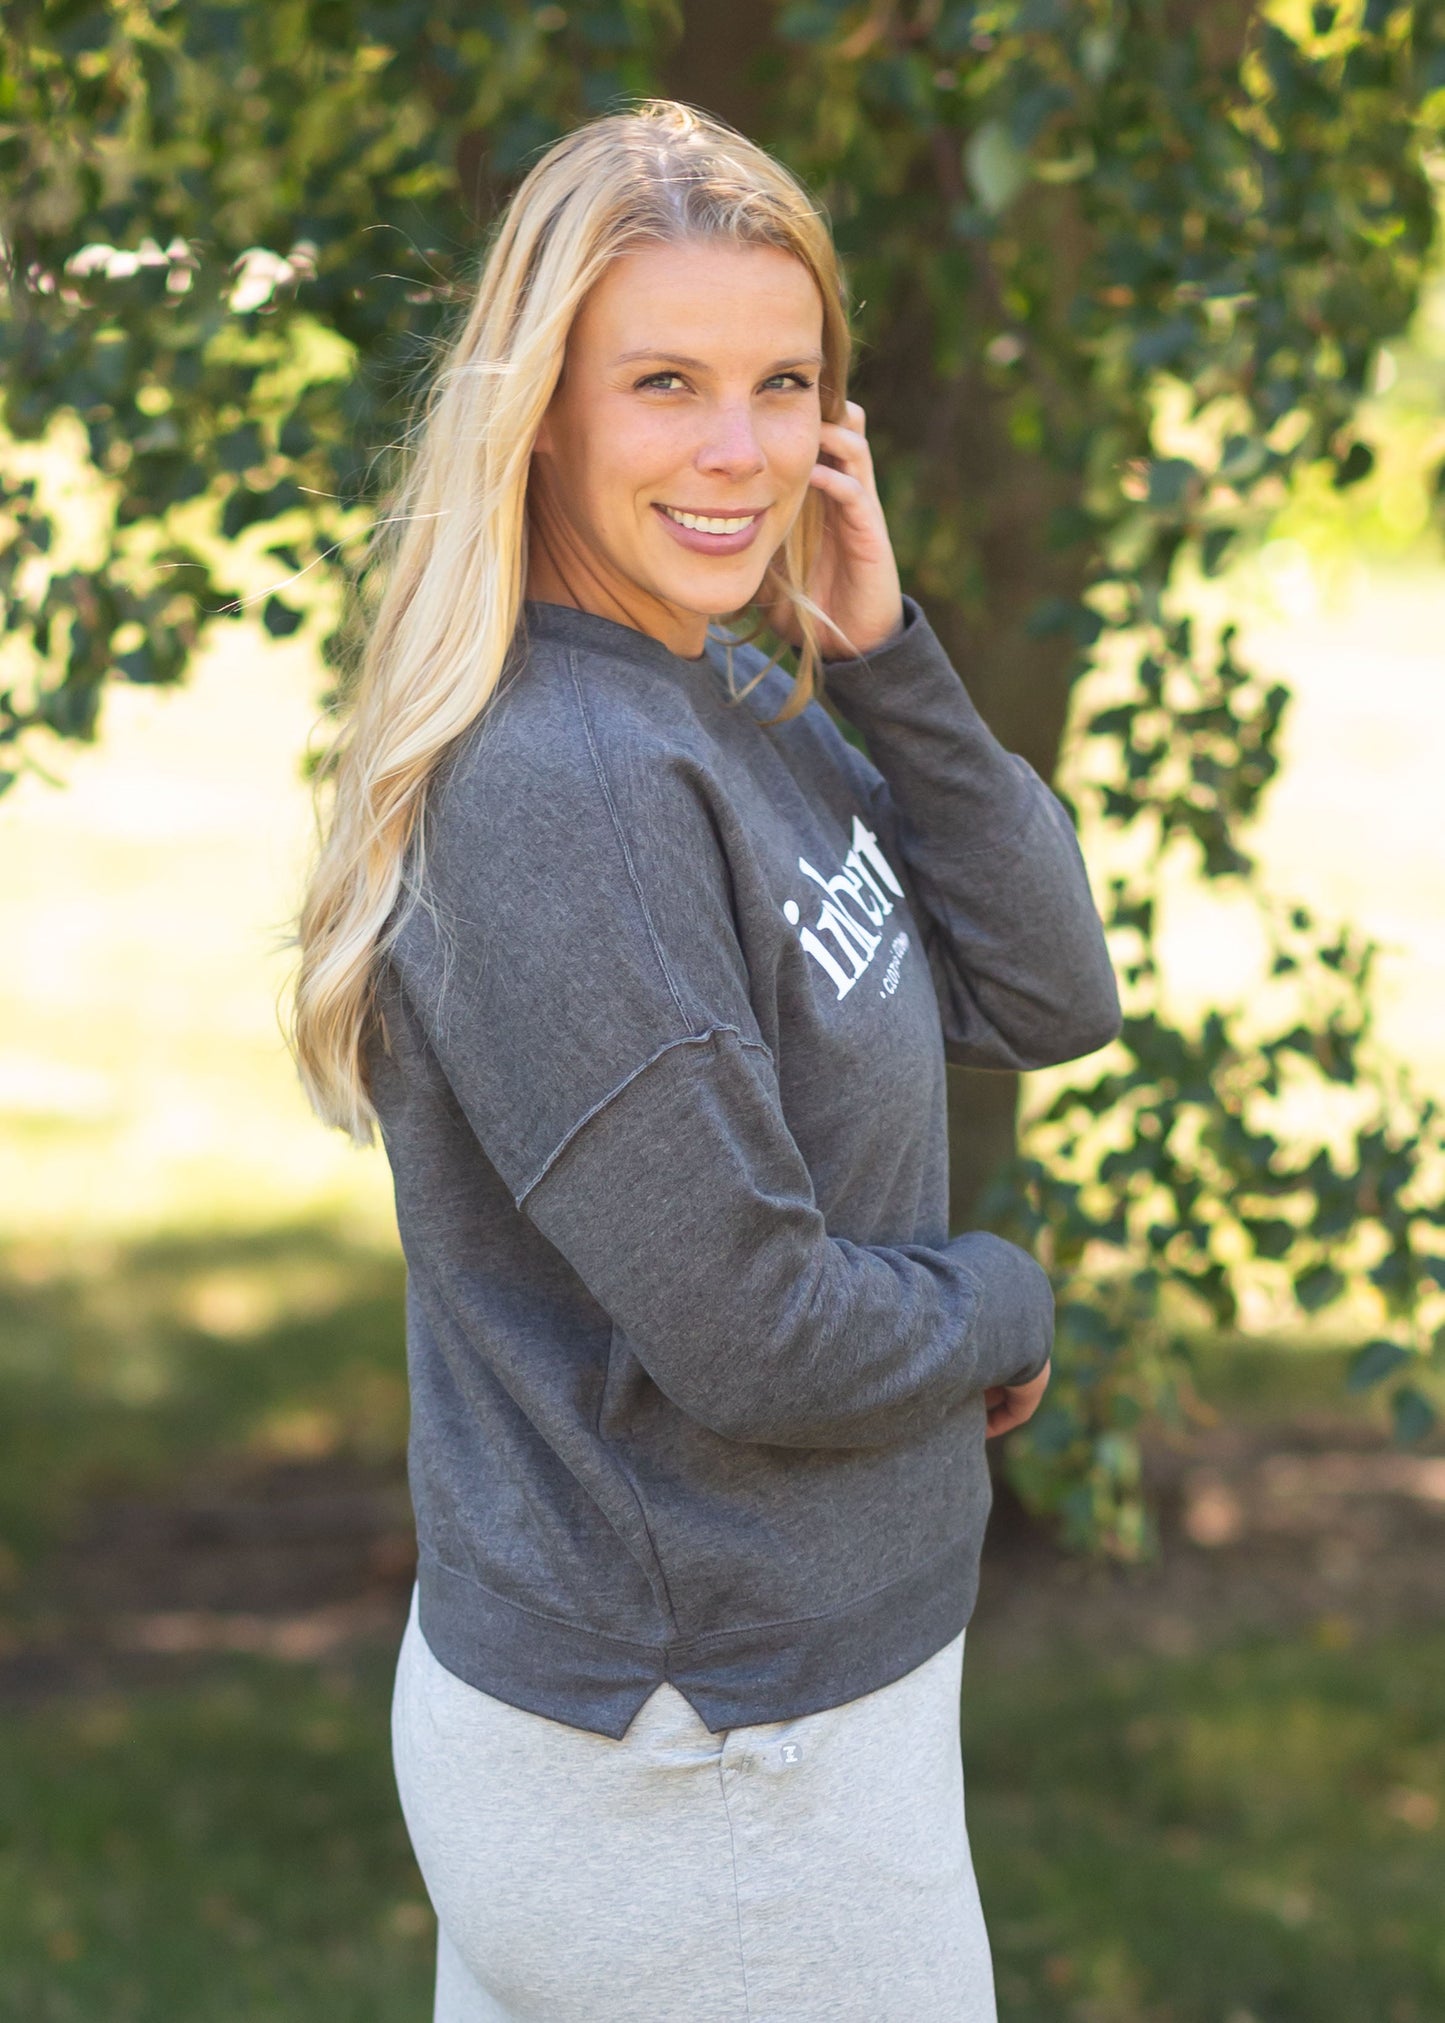 Inherit Crew Neck Sweatshirt Tops come in charcoal, blush pink, or hearthered light grey. They have white Inherit logo across the front. There is a raw hem detail on the arms around the bicep and then another raw hem down the shoulder and stopping where the two touch.